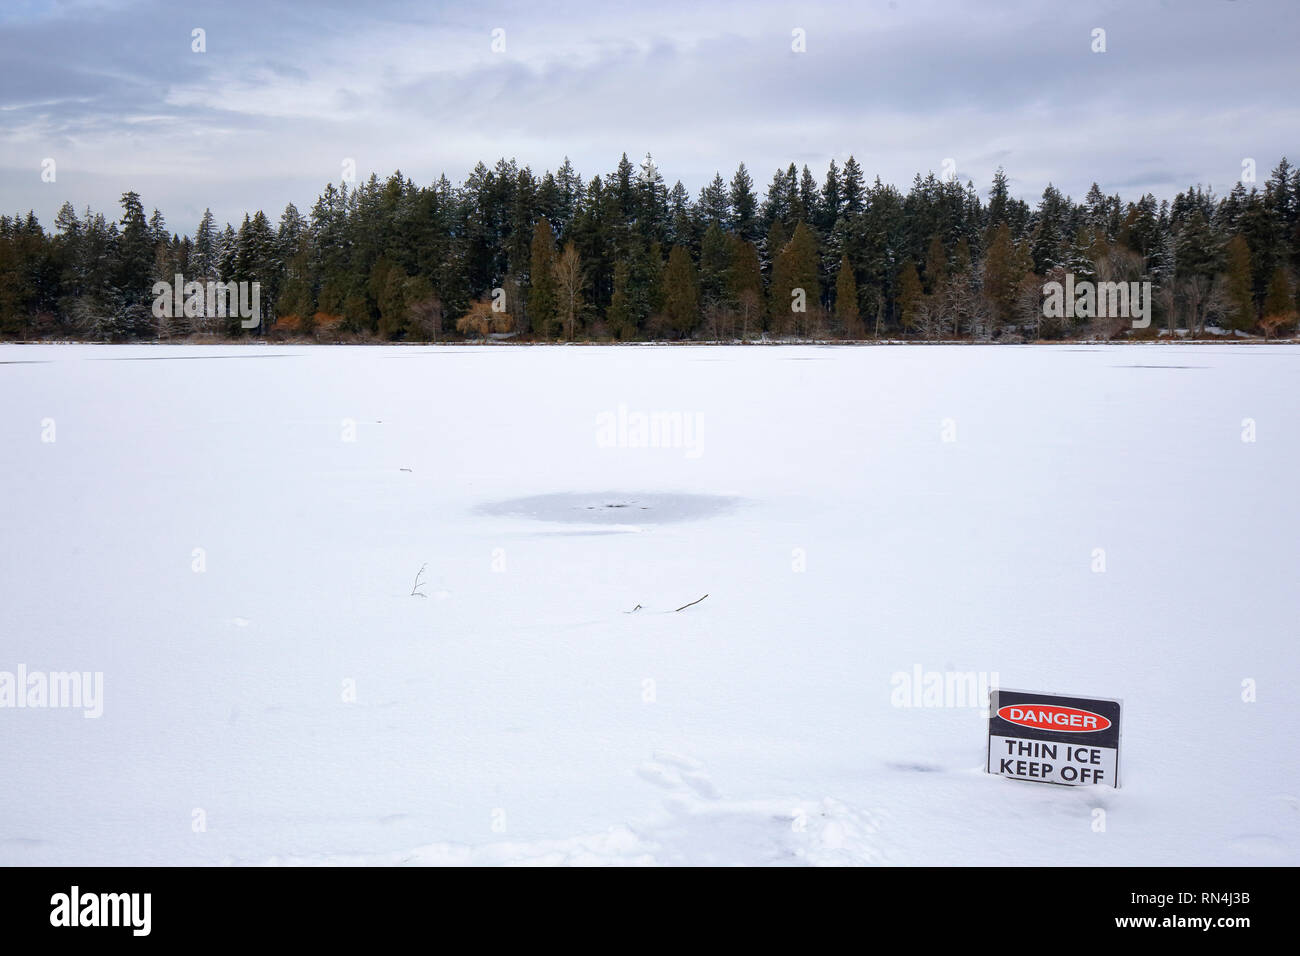 A 'Danger, Thin Ice!' sign at Lost Lagoon, Stanley Park, Vancouver, British Columbia, Canada, February 11, 2019. Stock Photo